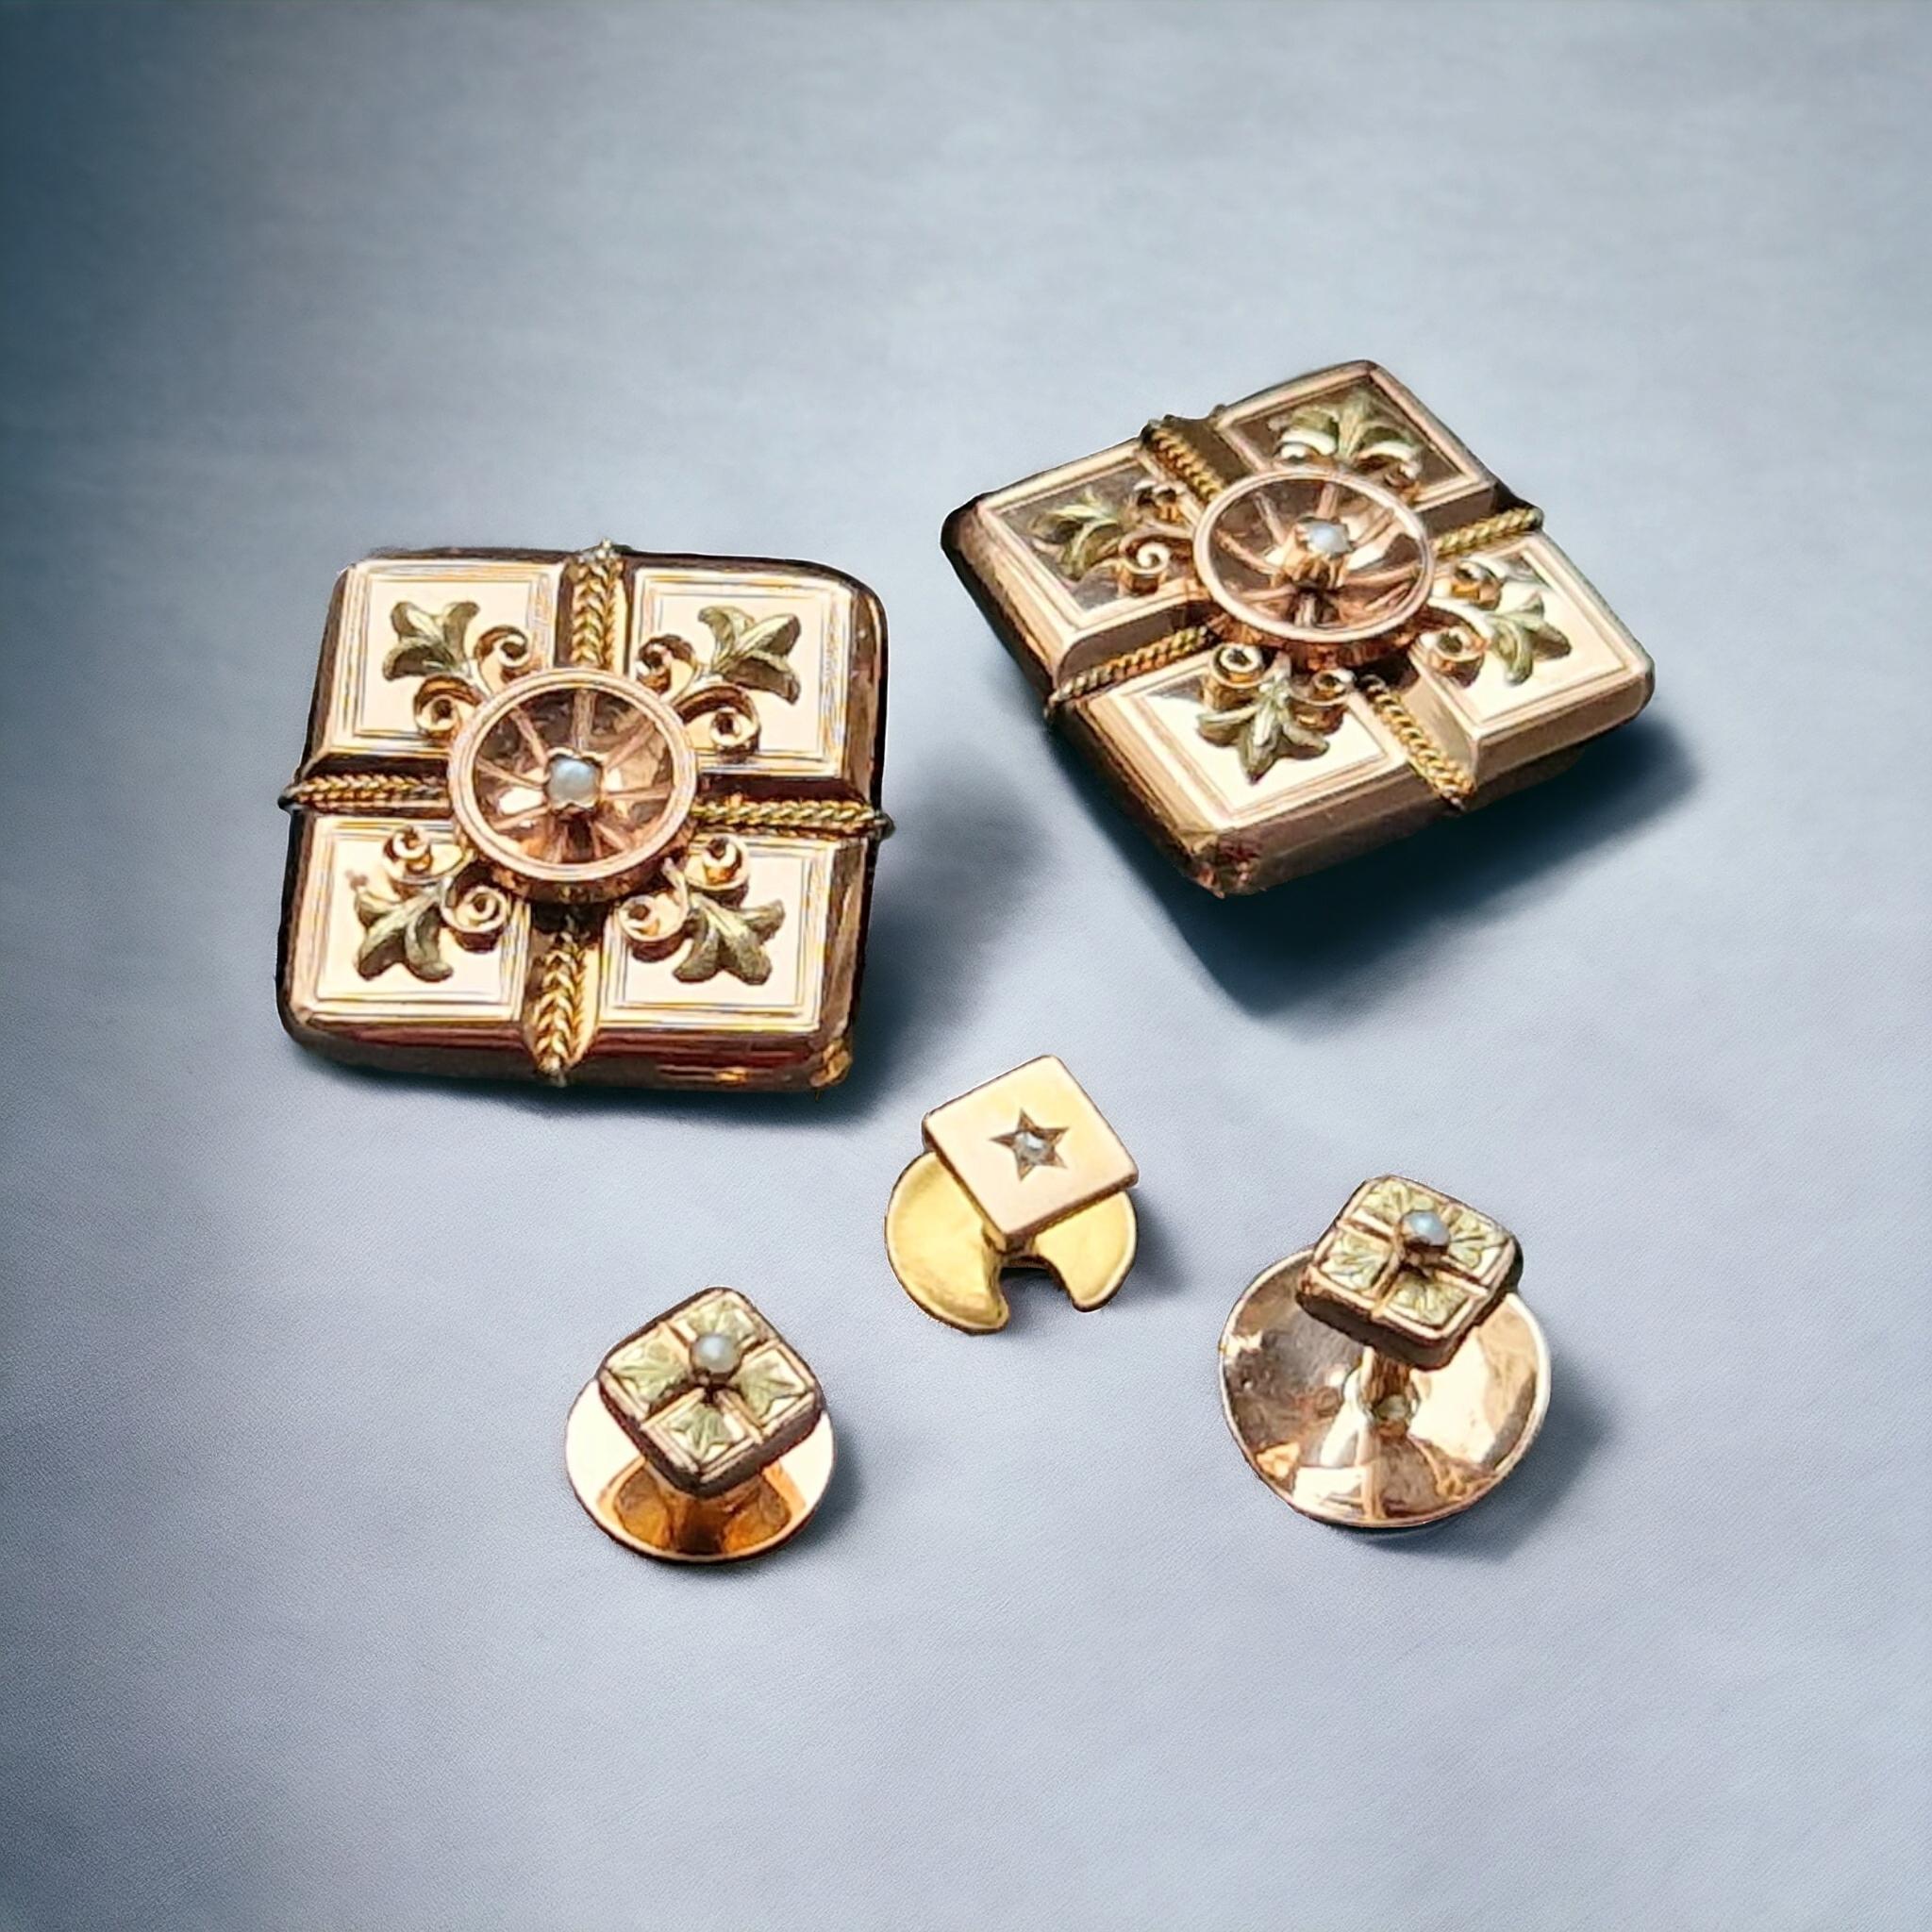 Pair of  Antique French Cufflinks & Studs with Lys Flower design,  19th C (1850) For Sale 3